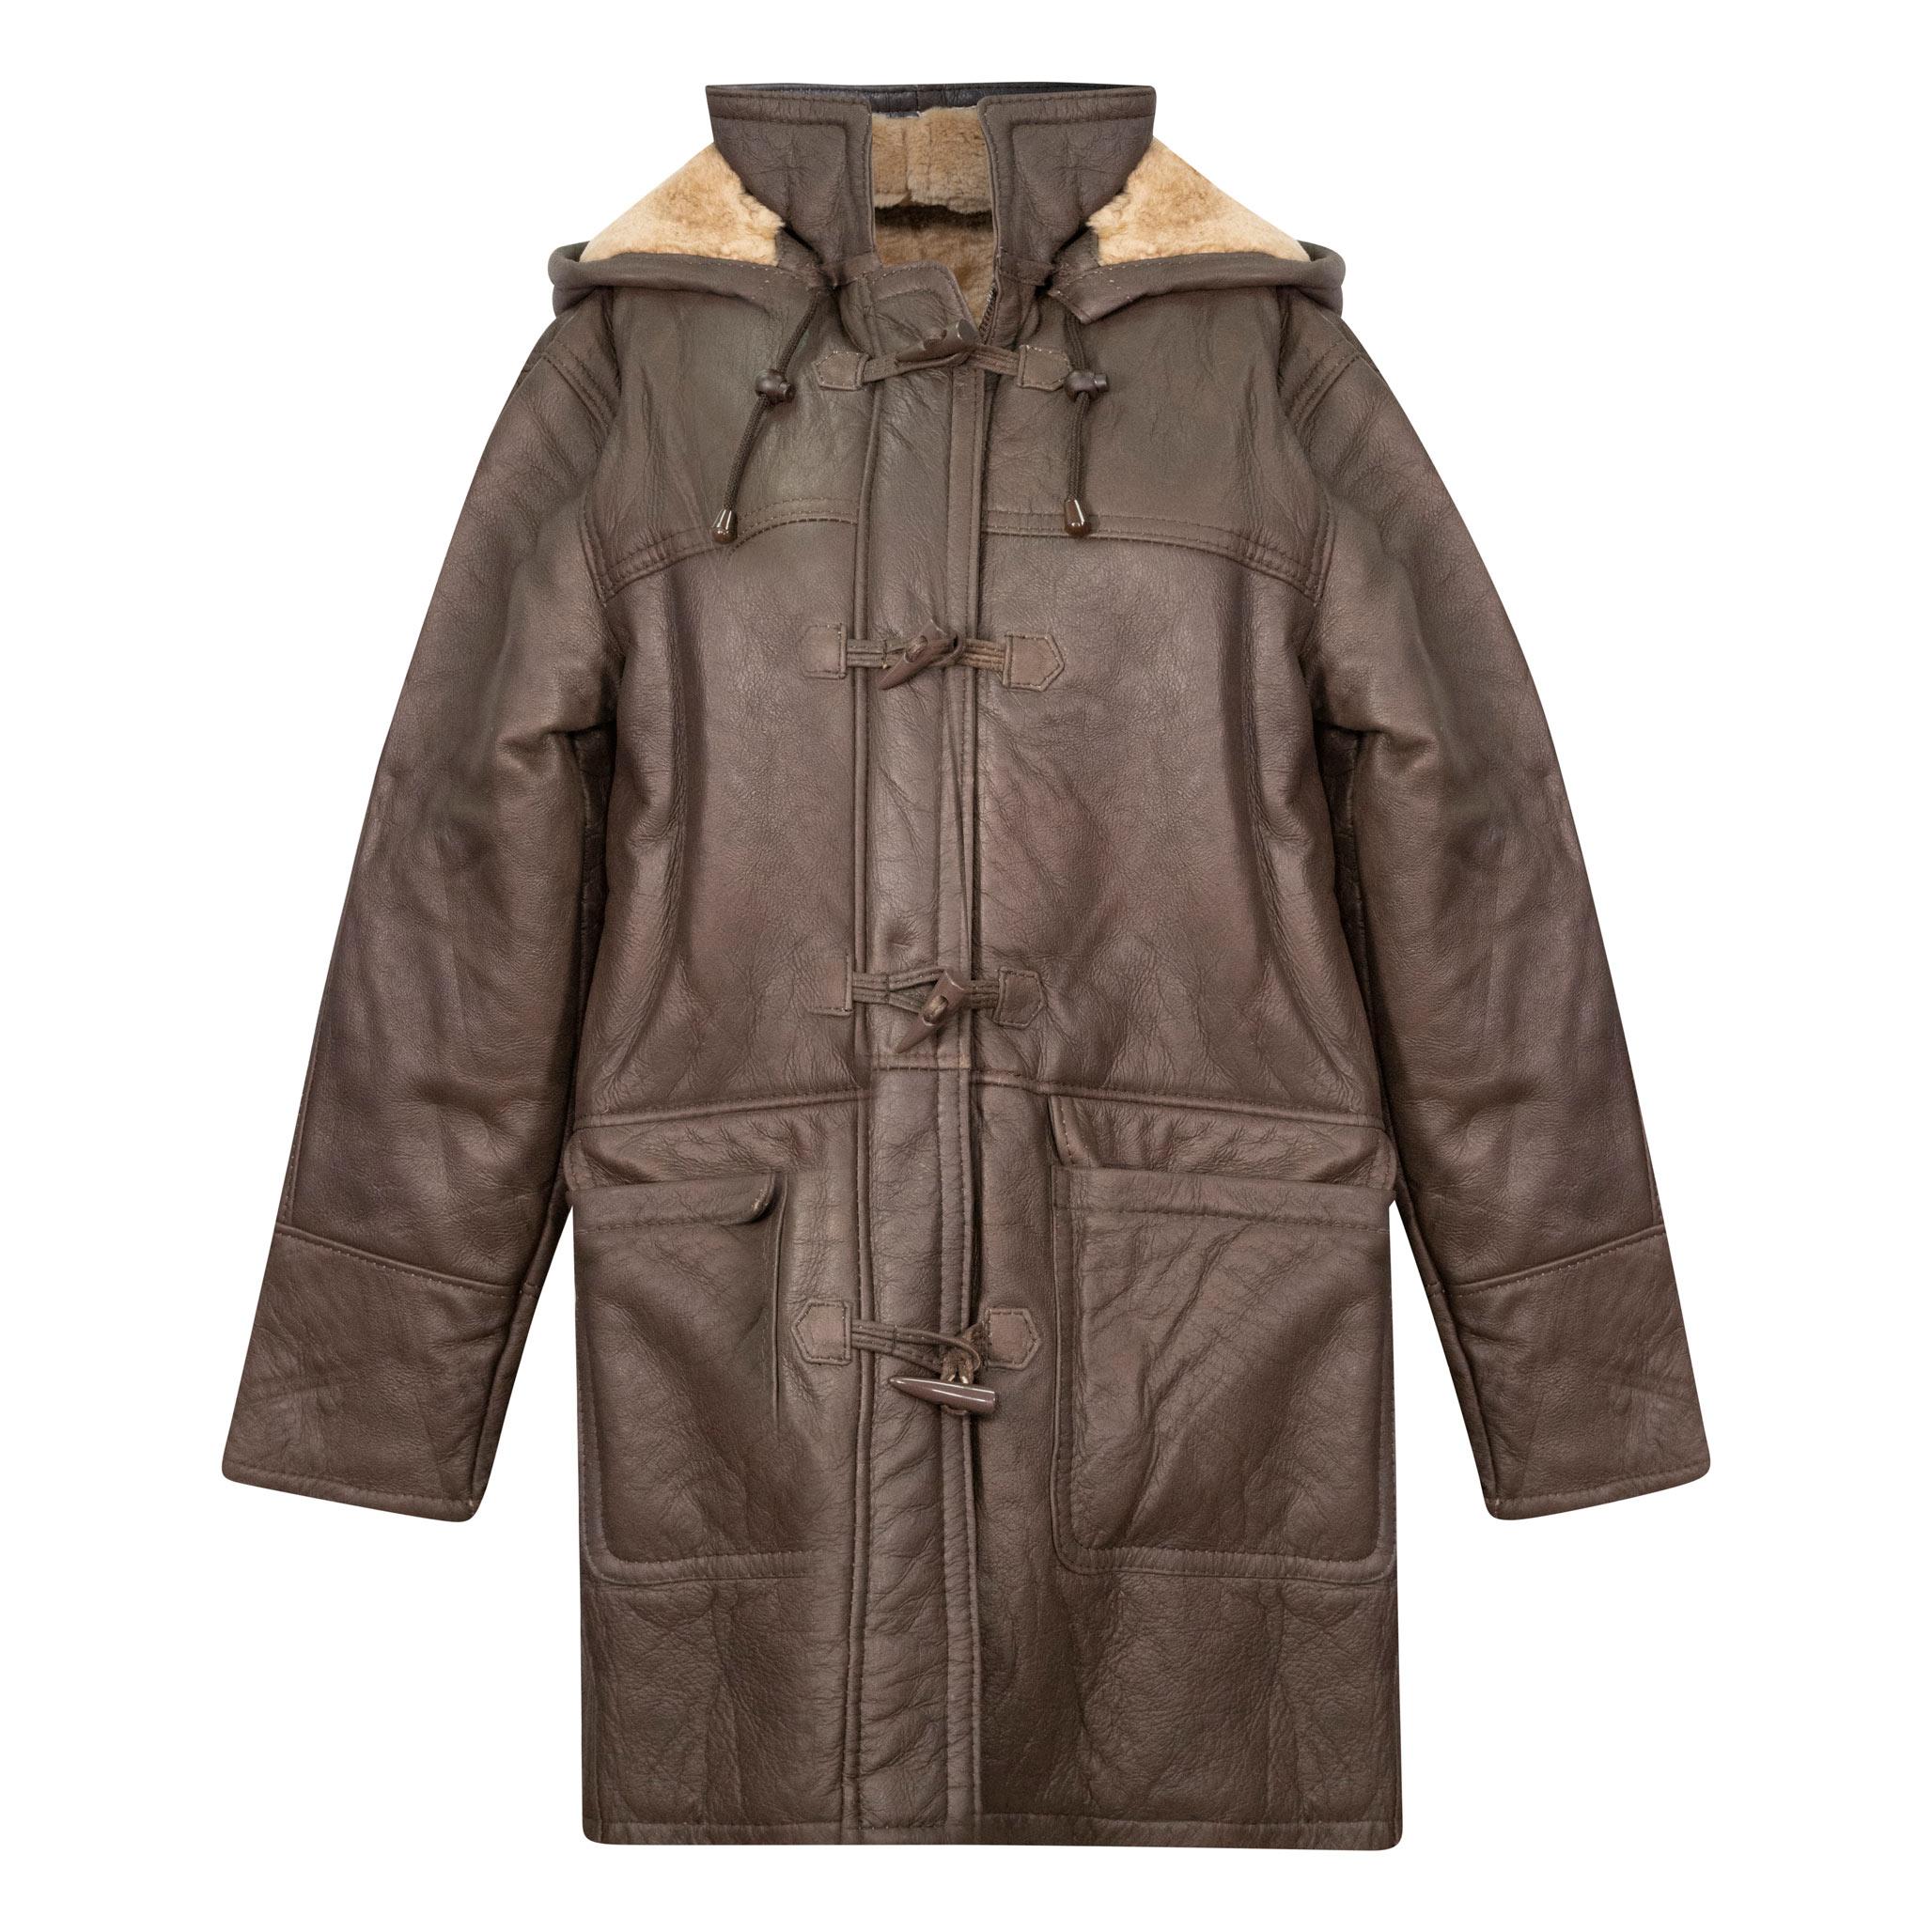 A 3/4 length womens leather and sheepskin duffle coat in brown. Zipped and toggle front fastening, with a comfortable fit. A generous sized hood. Outer